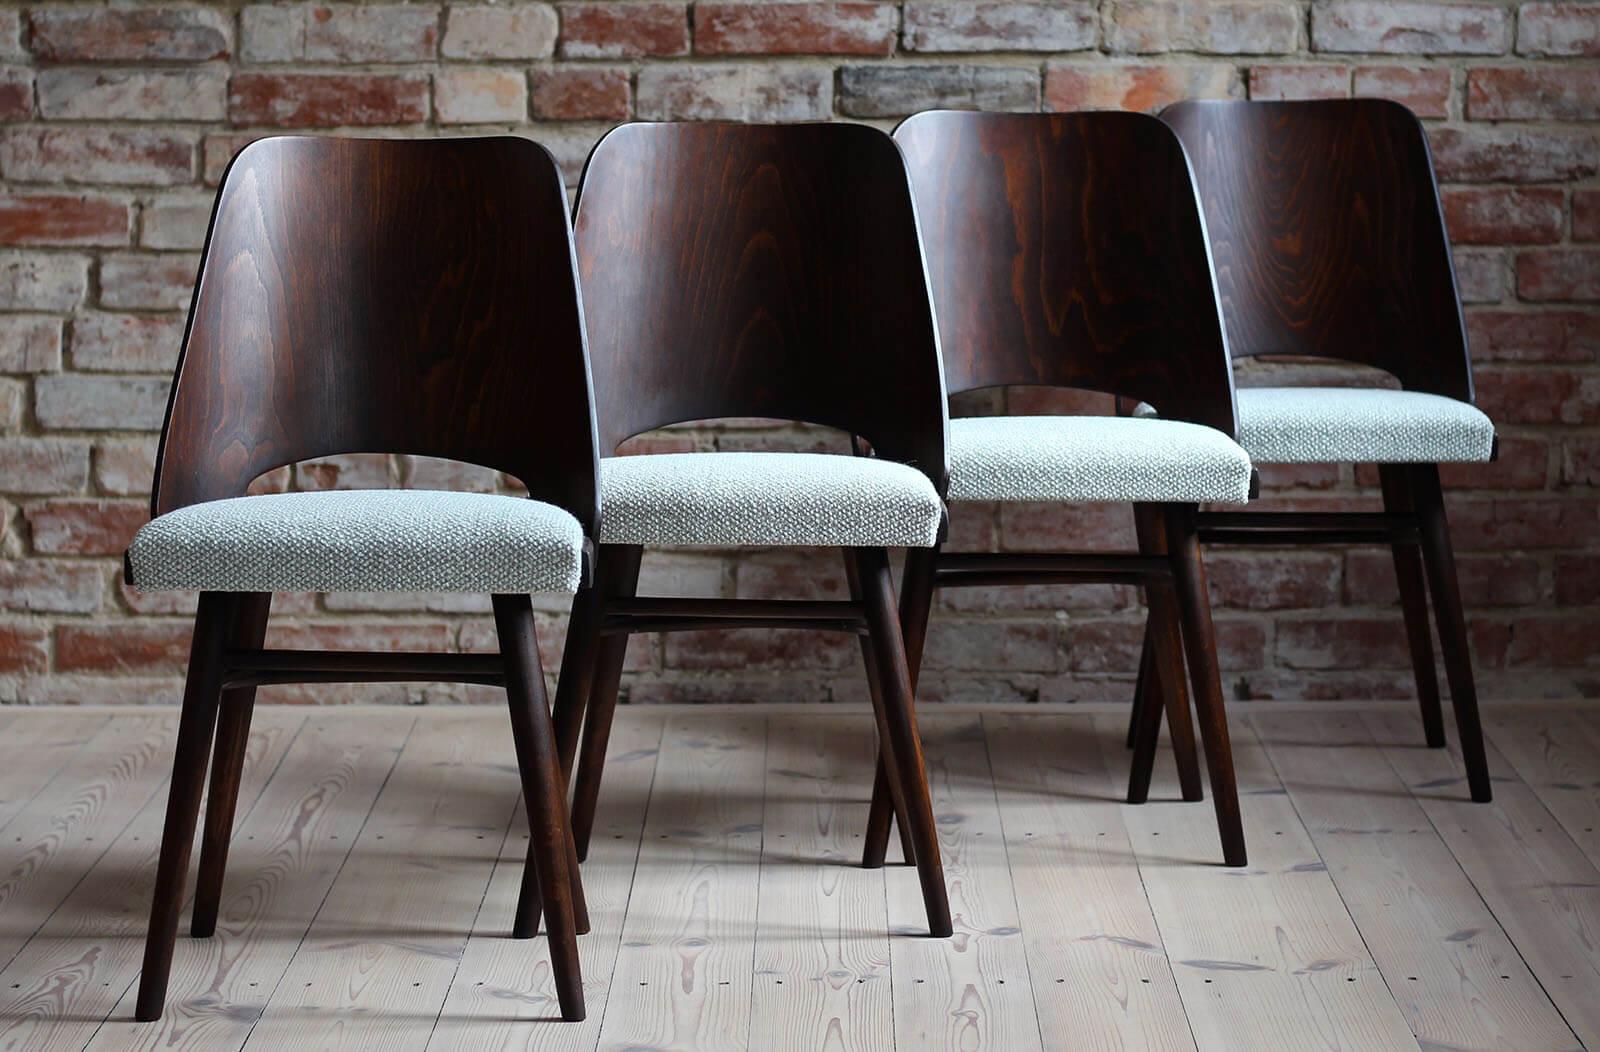 This set of four vintage dining chairs was designed by Czech designer Radomir Hofman in the 1960s. Produced by TON. The chairs have been completely restored finished with natural oil that gave them a natural and warm look. The set is reupholstered